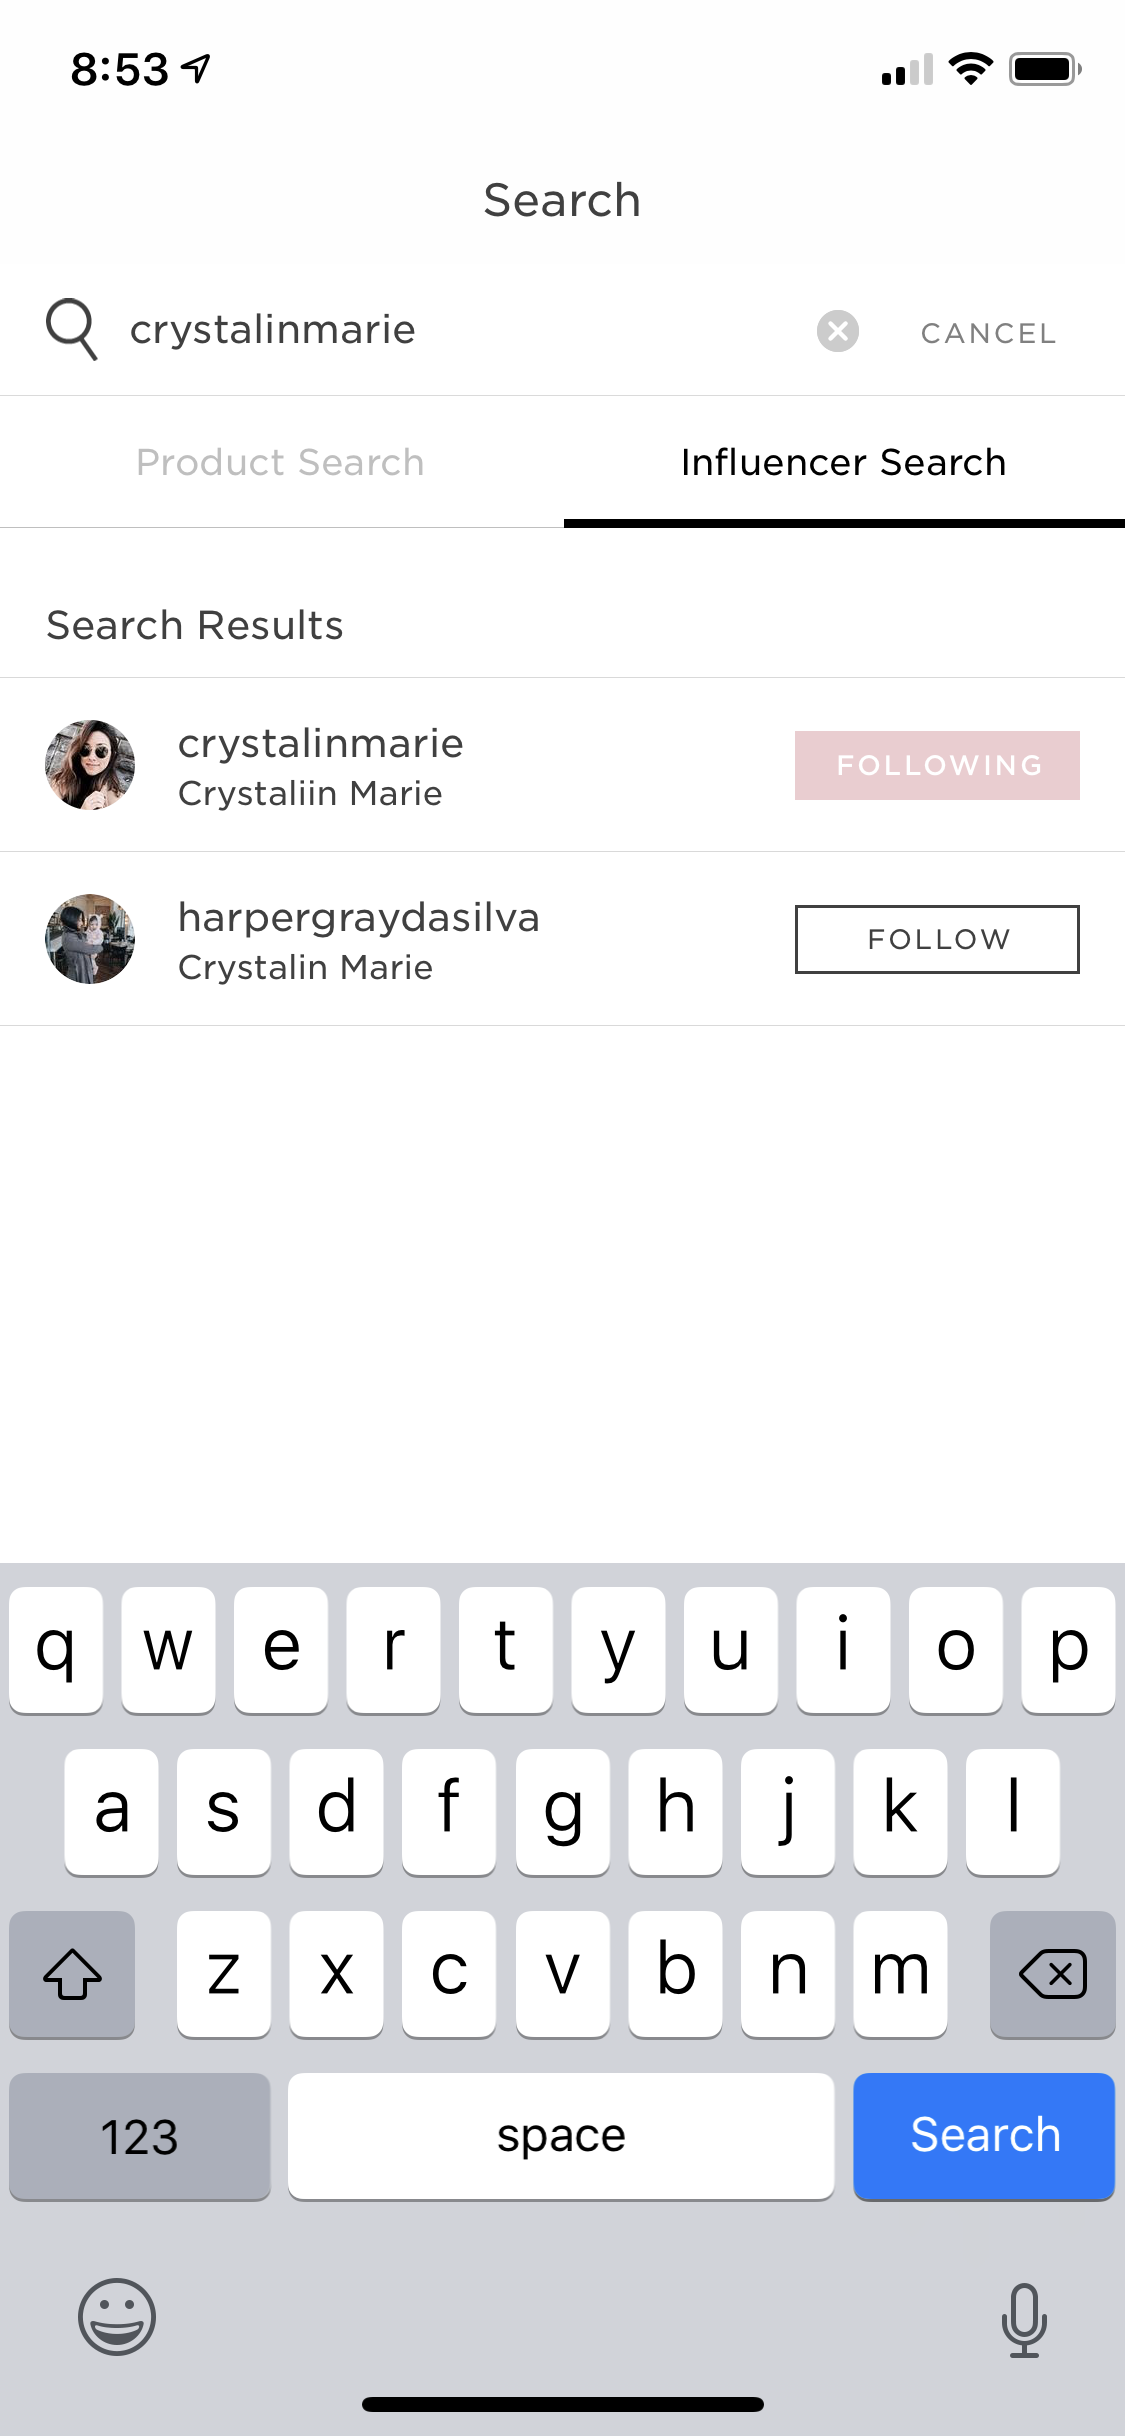 Search Influencer for Crystalin Marie